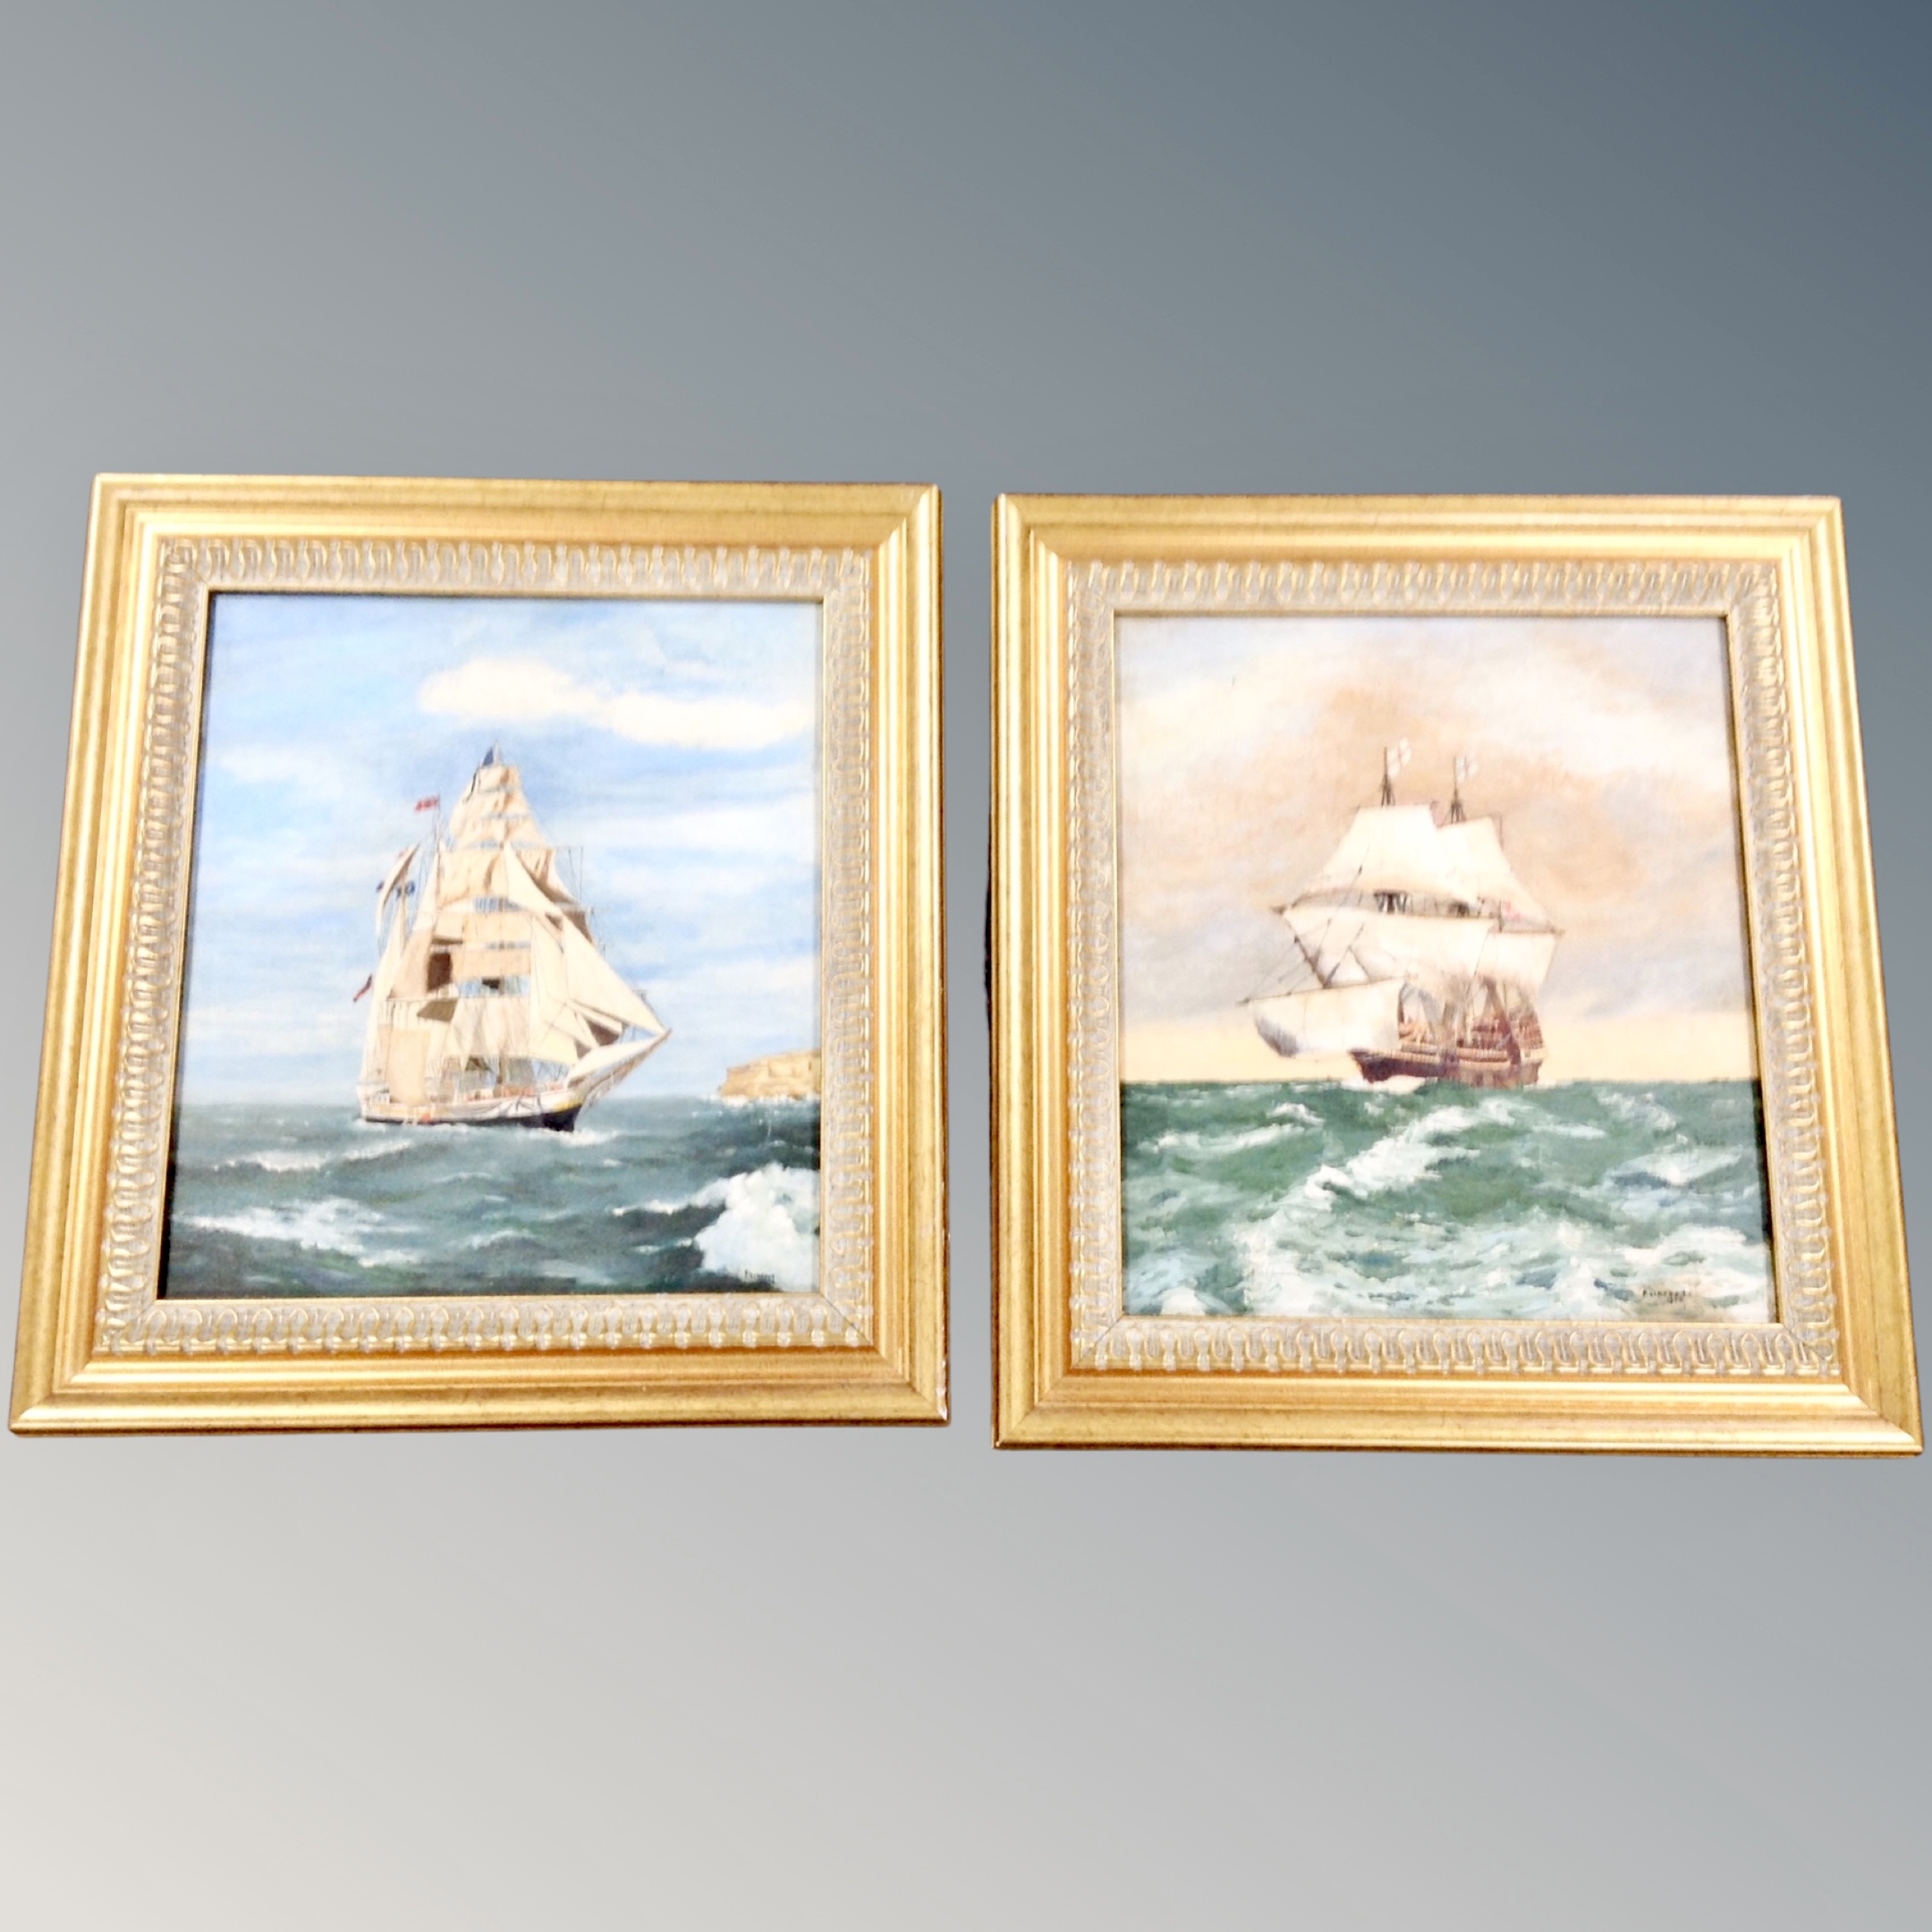 F Linfoot : A pair of oils on board depicting tall ships at sea, signed and dated 1974.